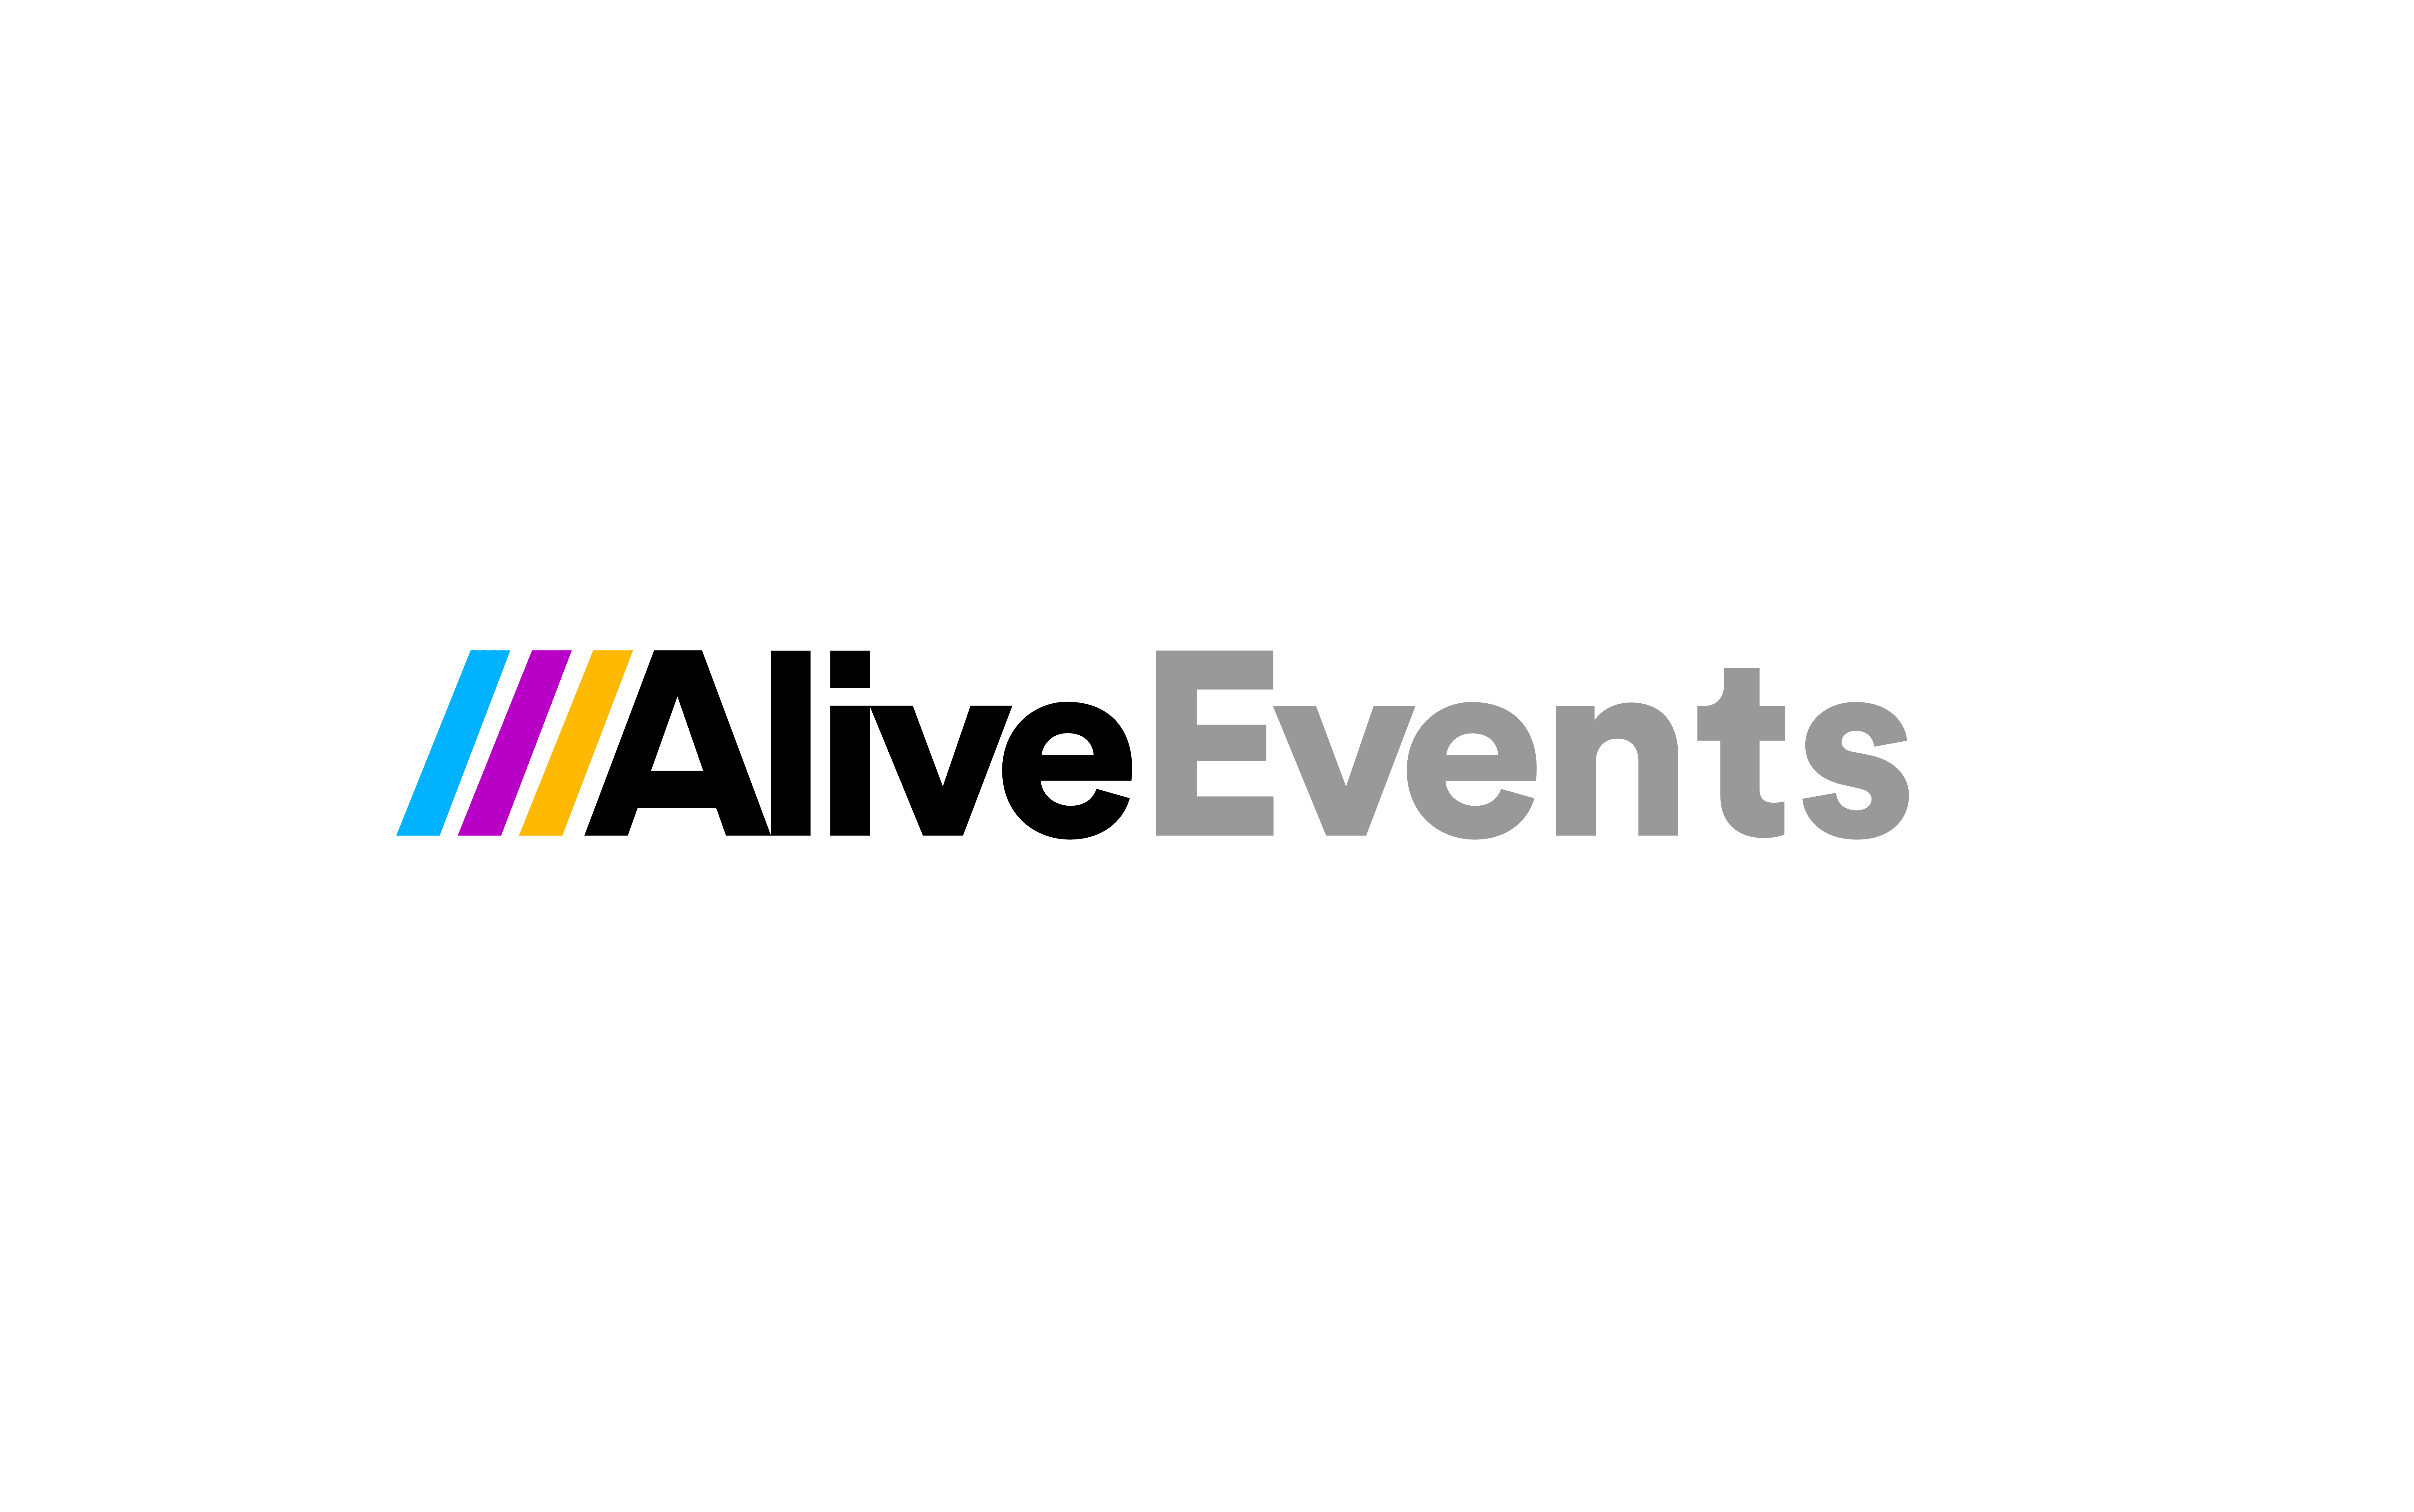 Alive Events